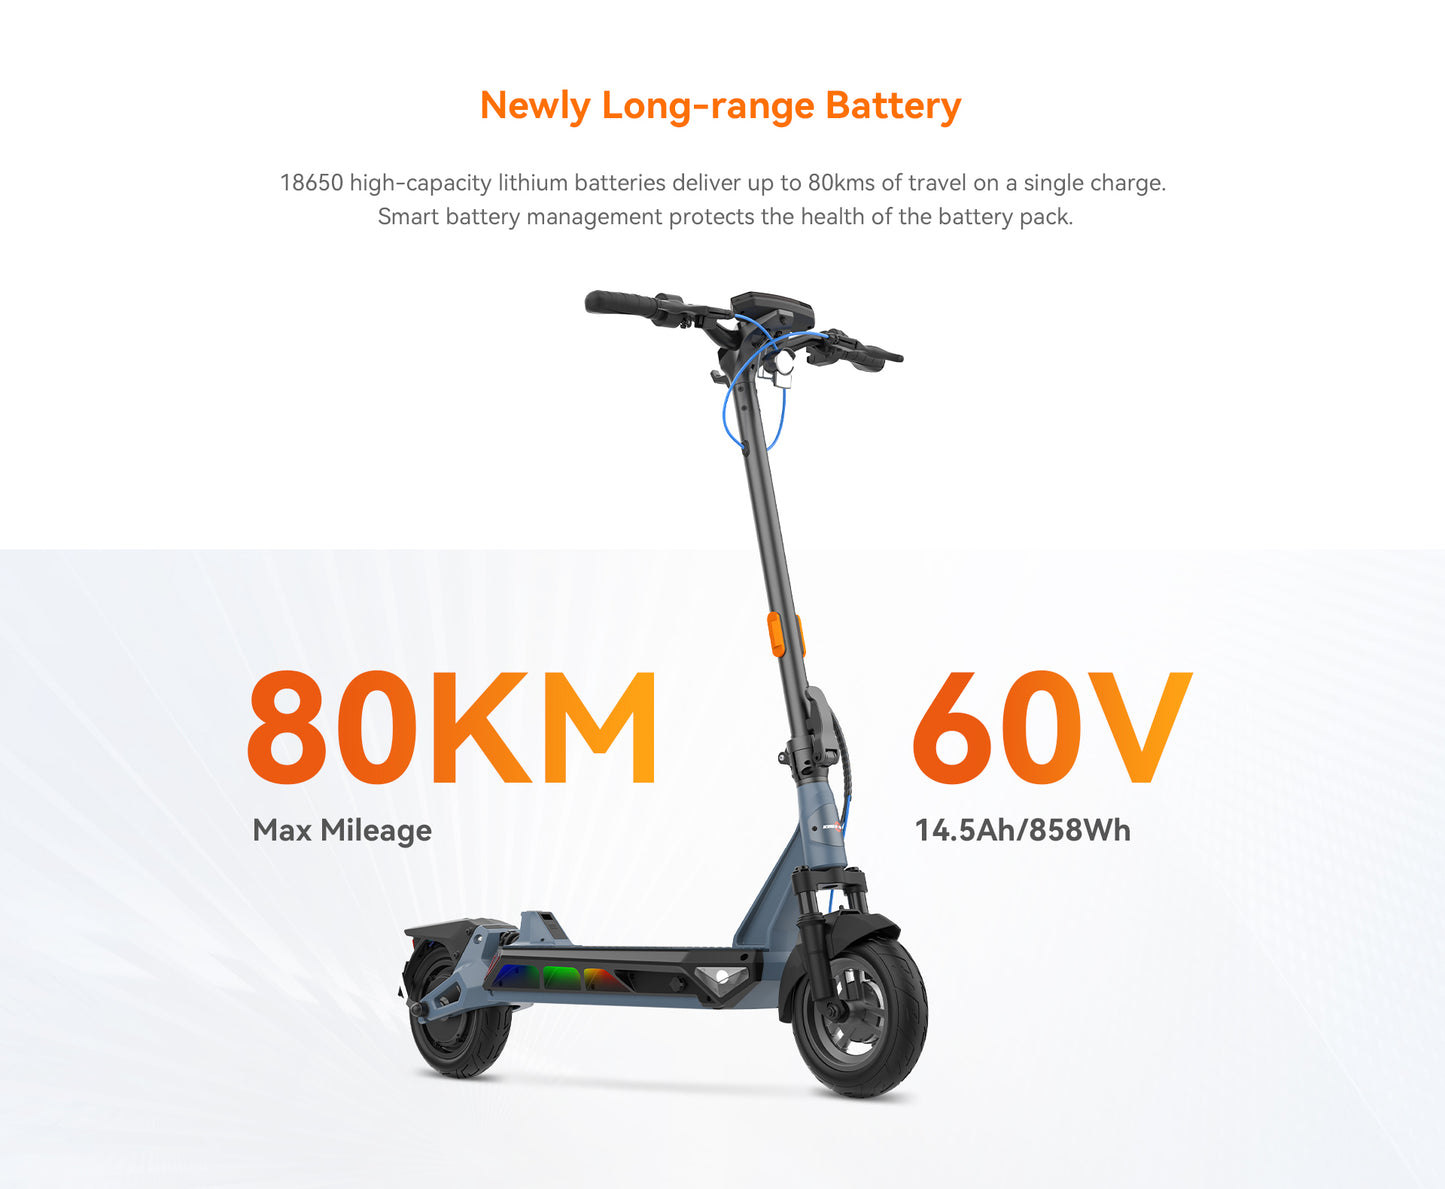 KingSong N12 Pro Electric Scooter